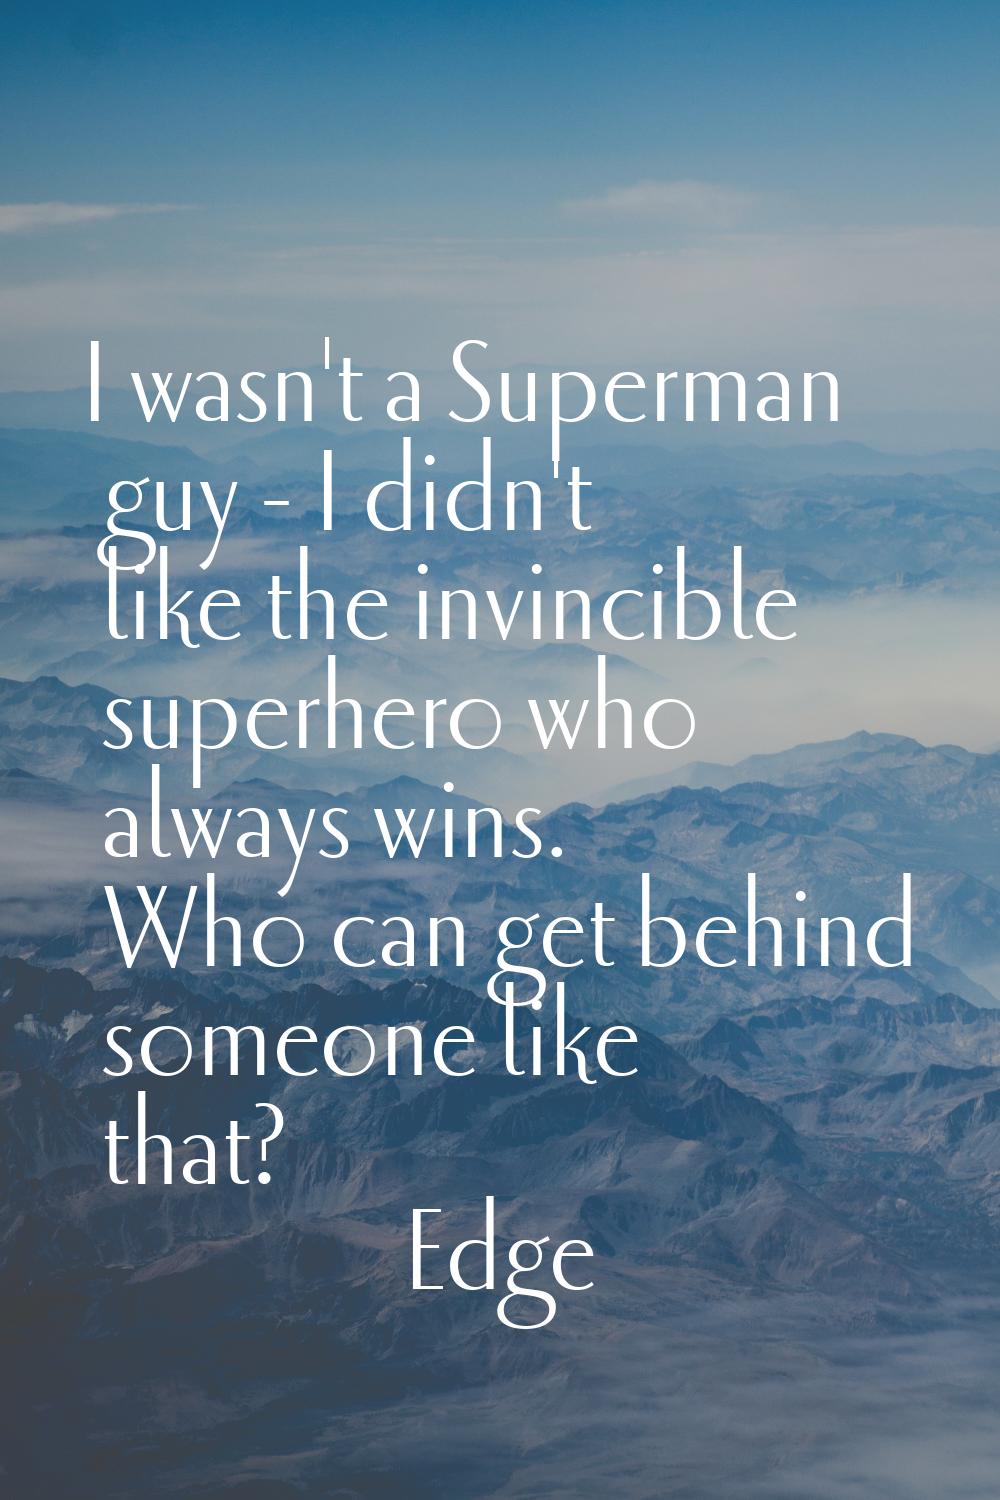 I wasn't a Superman guy - I didn't like the invincible superhero who always wins. Who can get behin